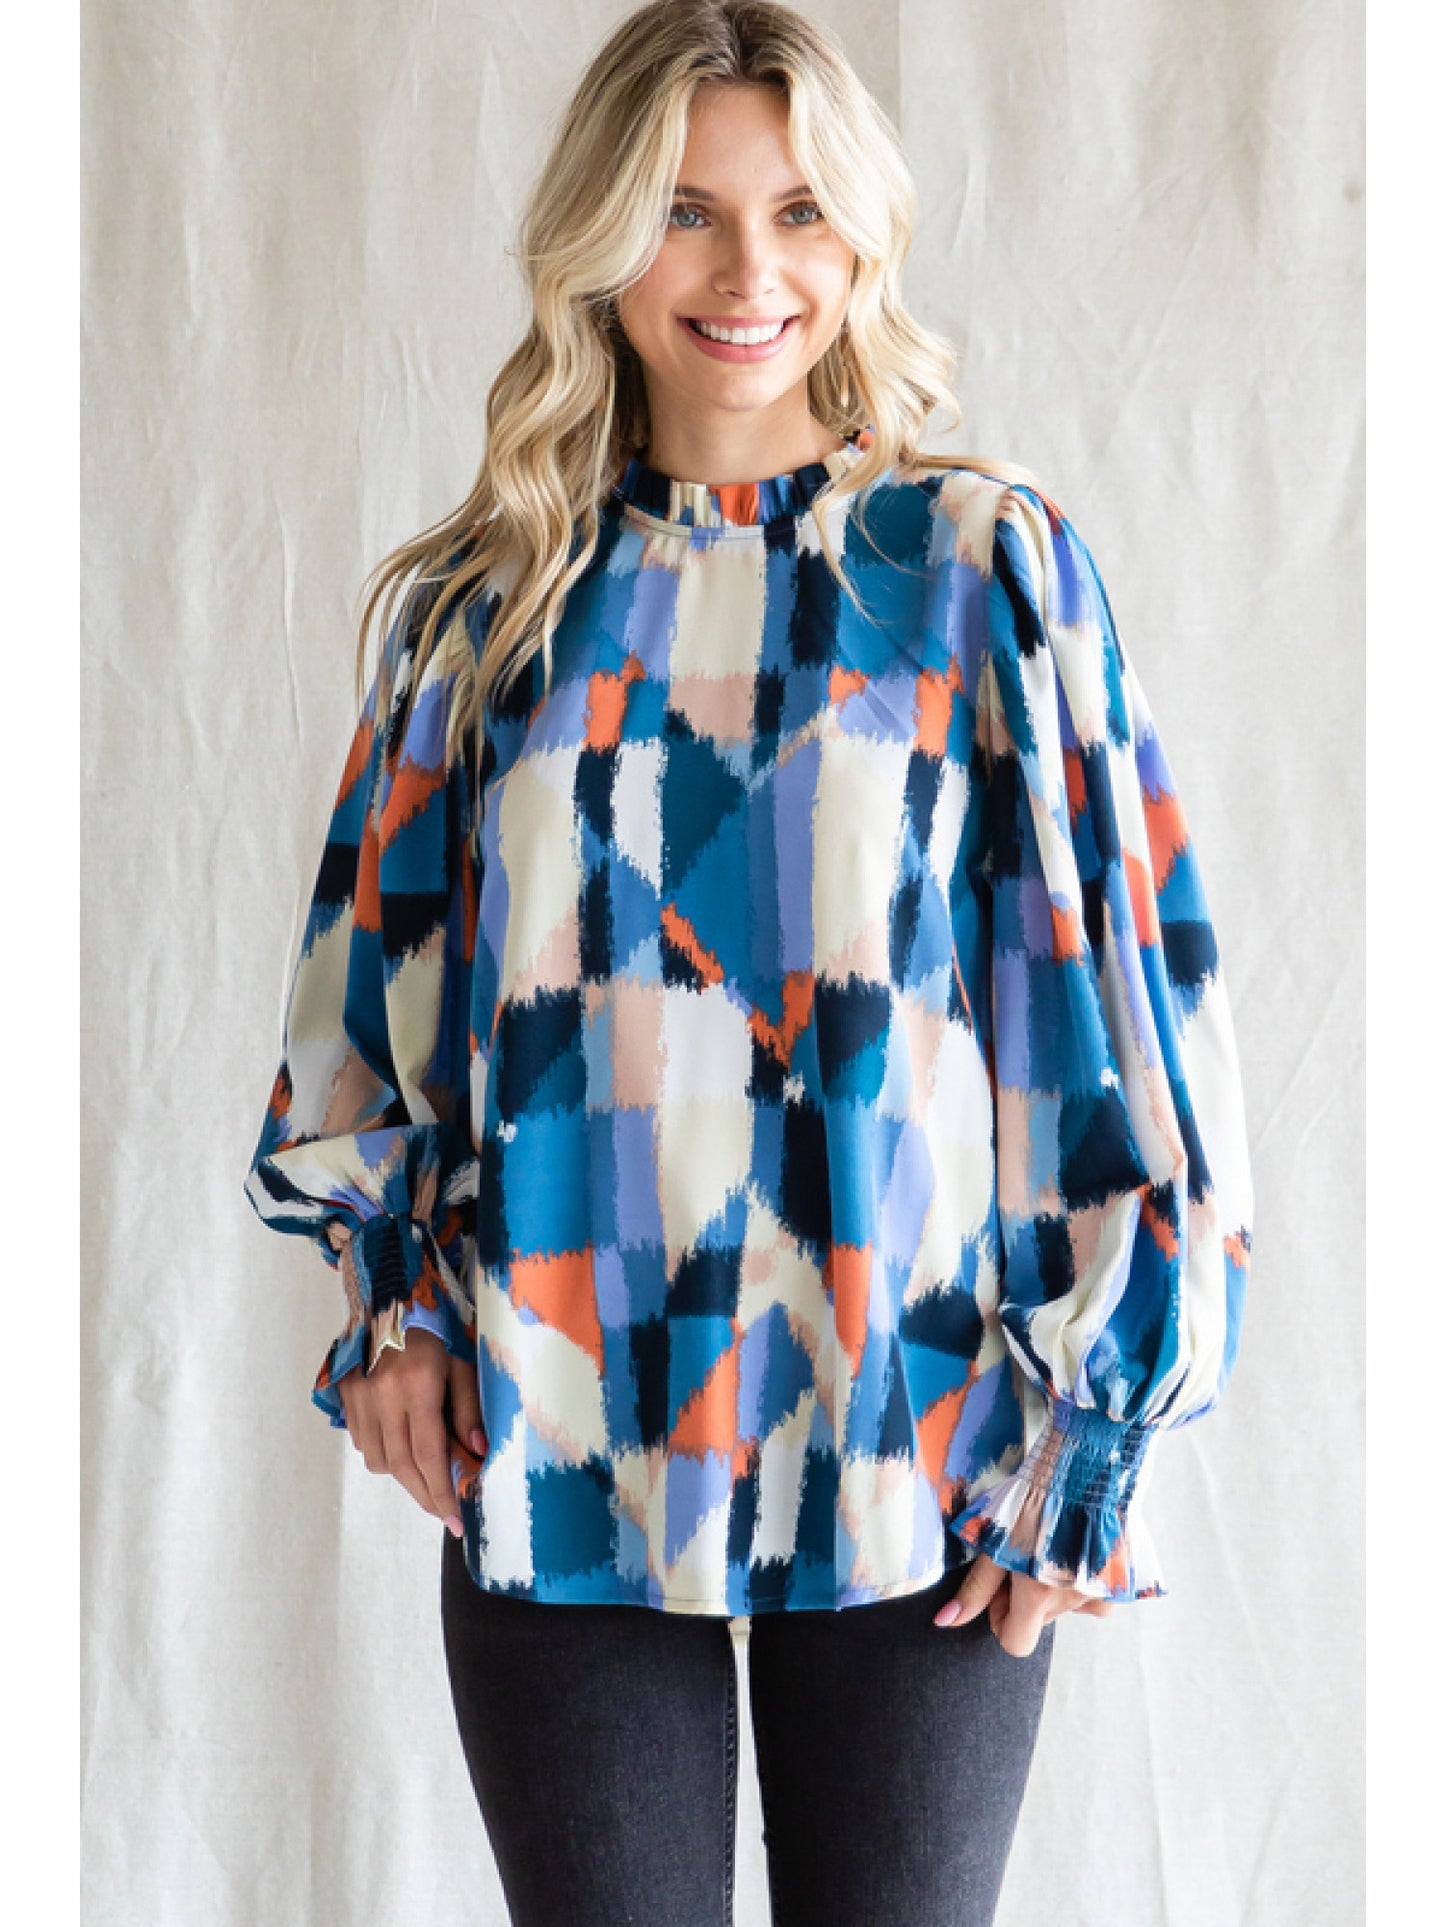 The Abstract Top